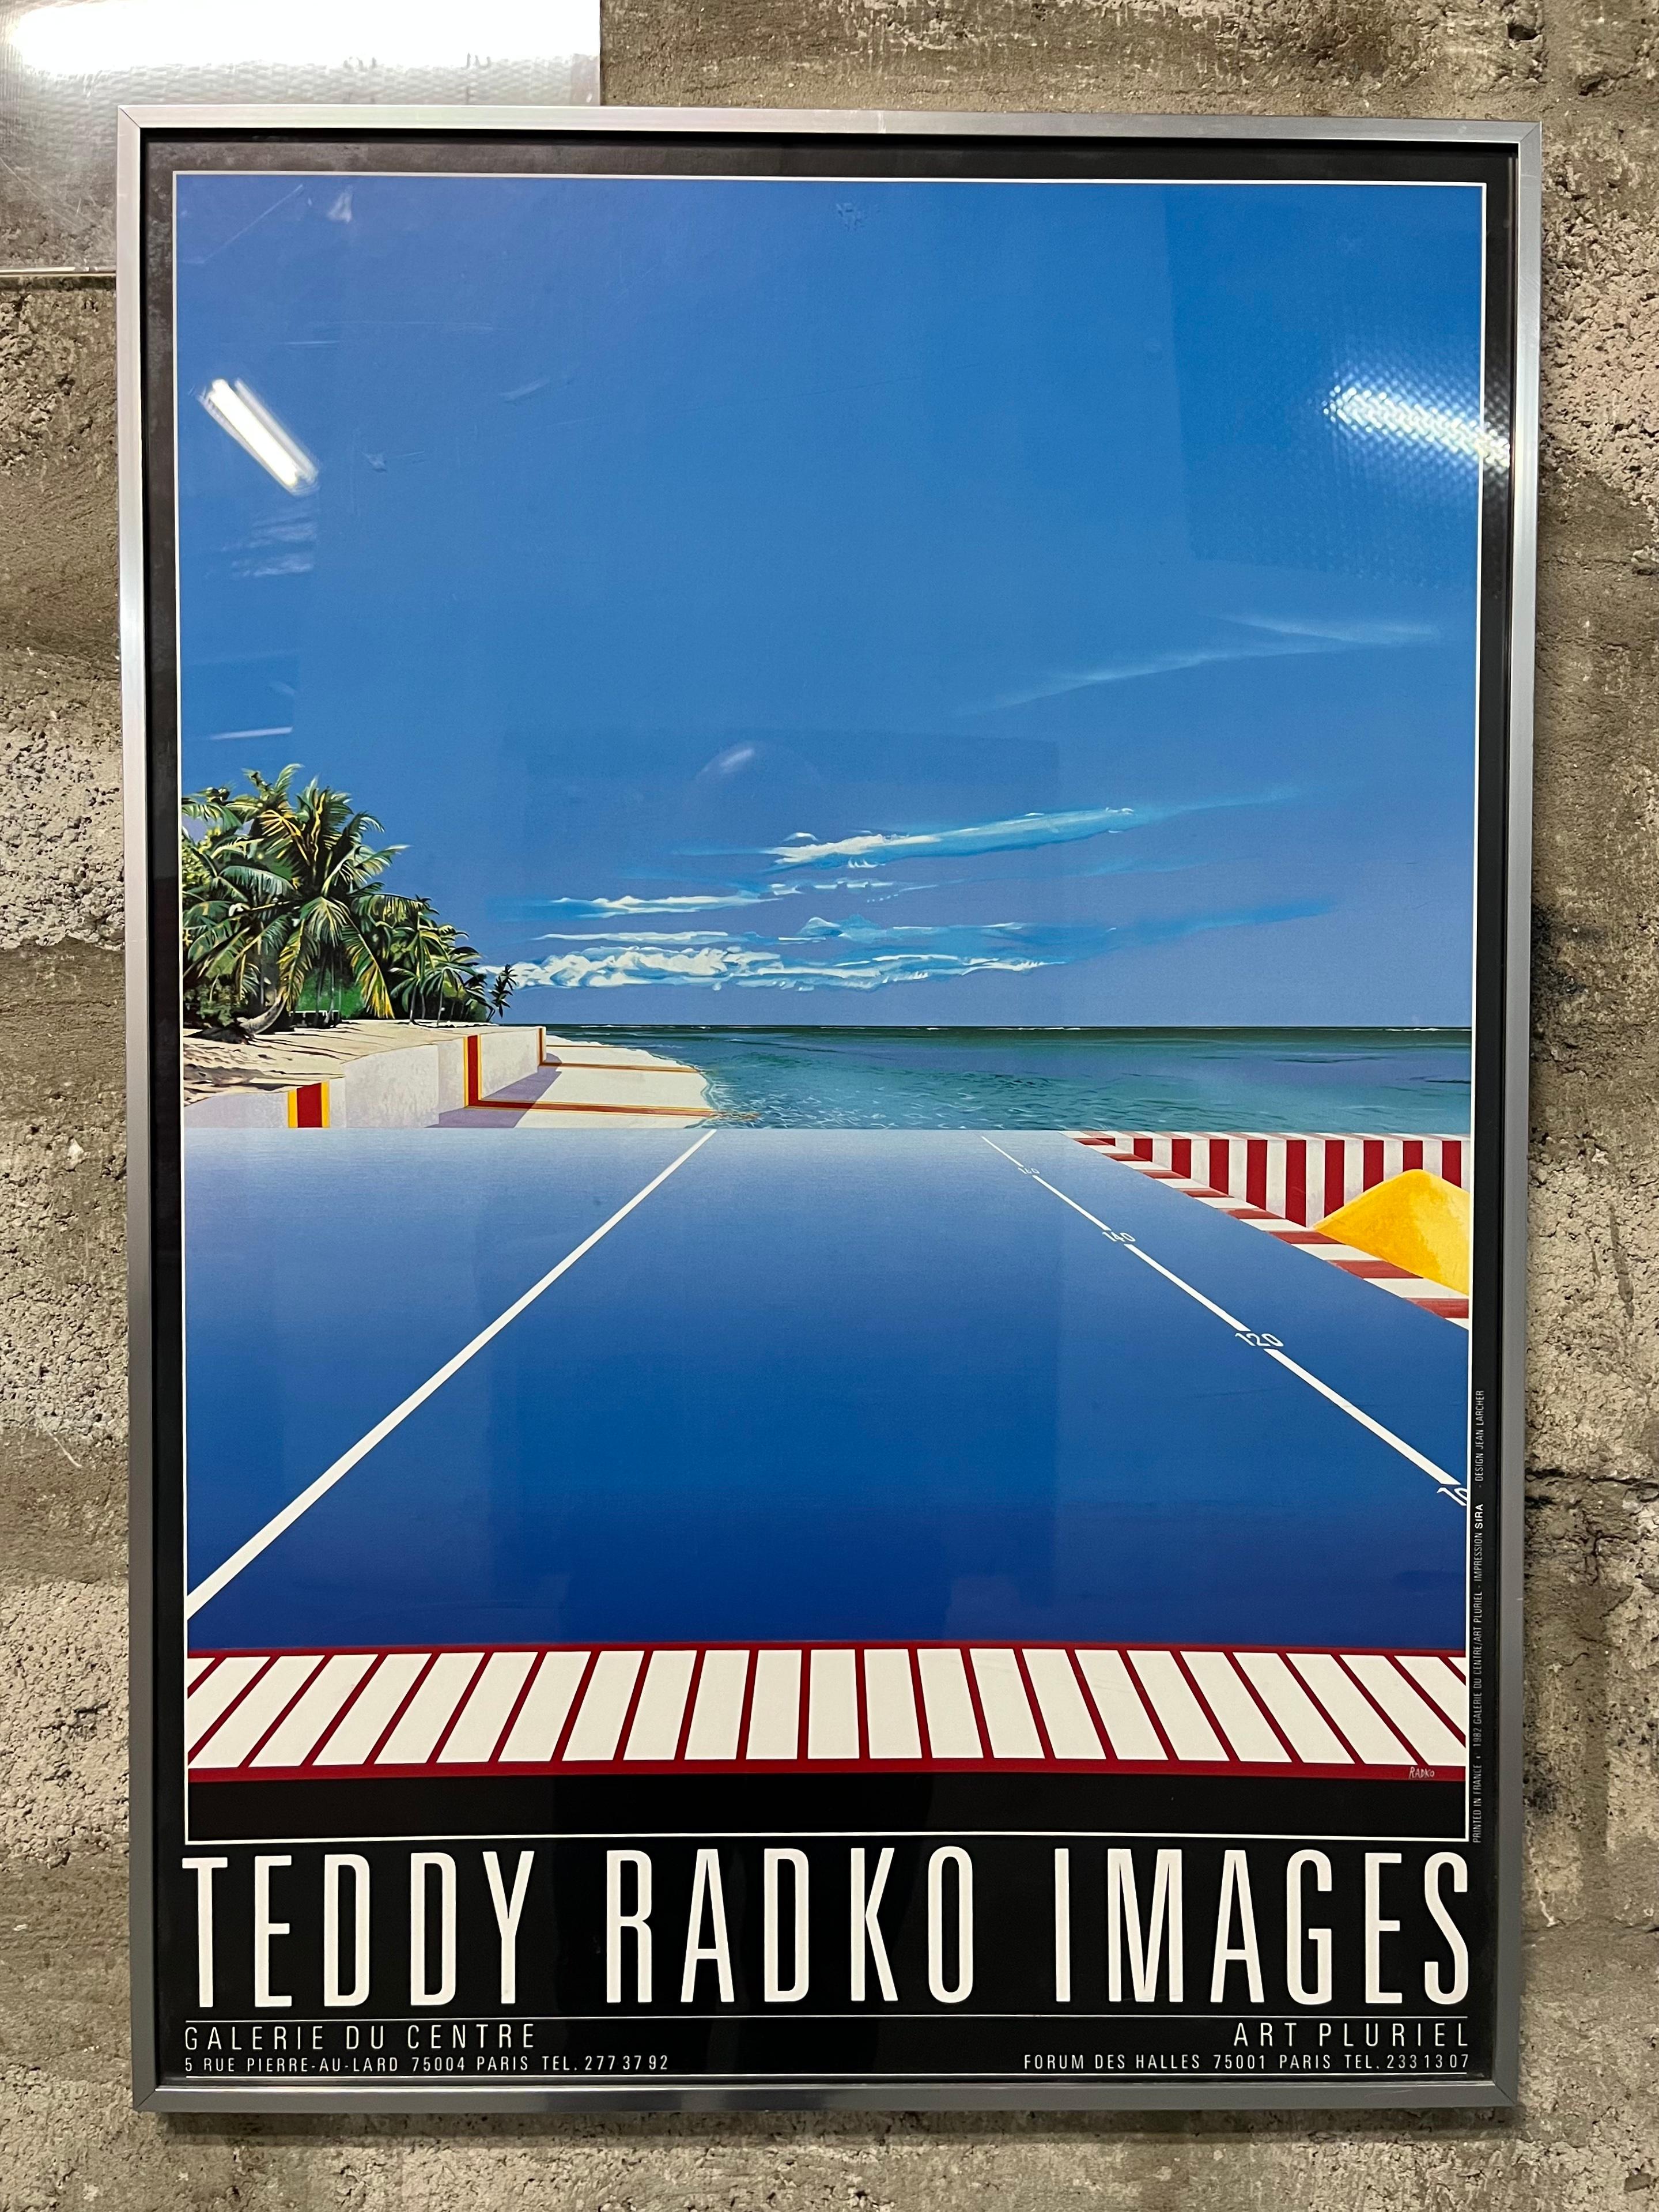 1980s Teddy Radko Images Exhibition Original Framed Poster
Teddy Radko (French, 20th C.)
Framed in Brushed Aluminum Frame , under glass. 
In excellent original condition  with very minor signs of wear and age. Please see close up pictures for more